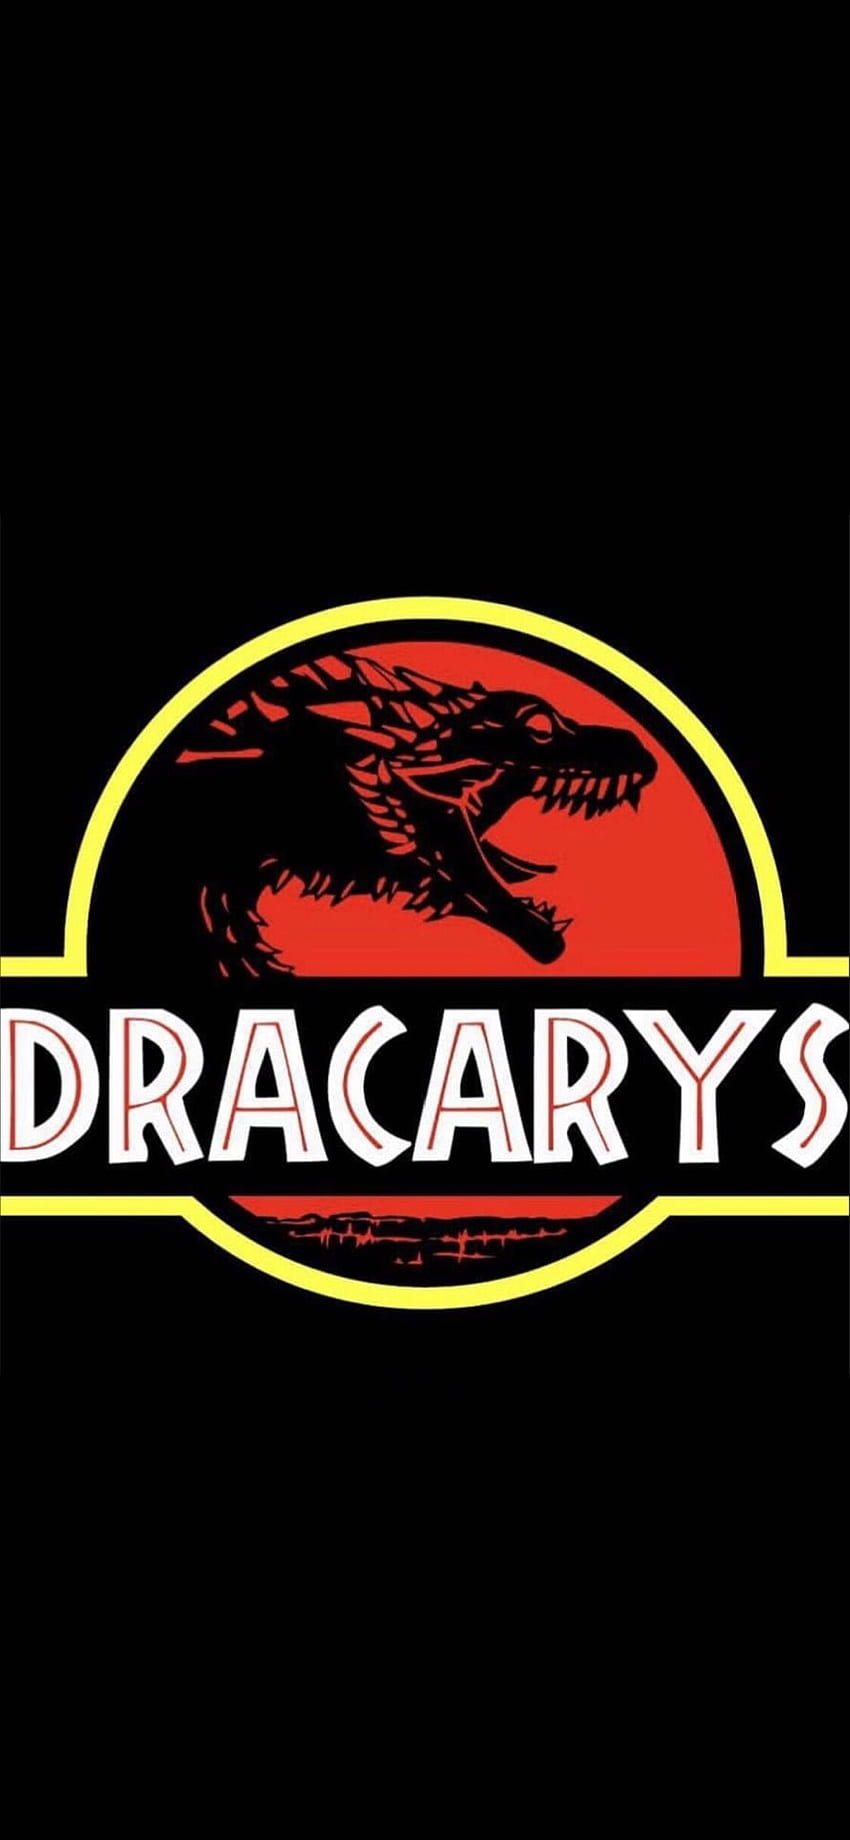 Dracarys 🔥🐉 | How to train dragon, Homage, Poster